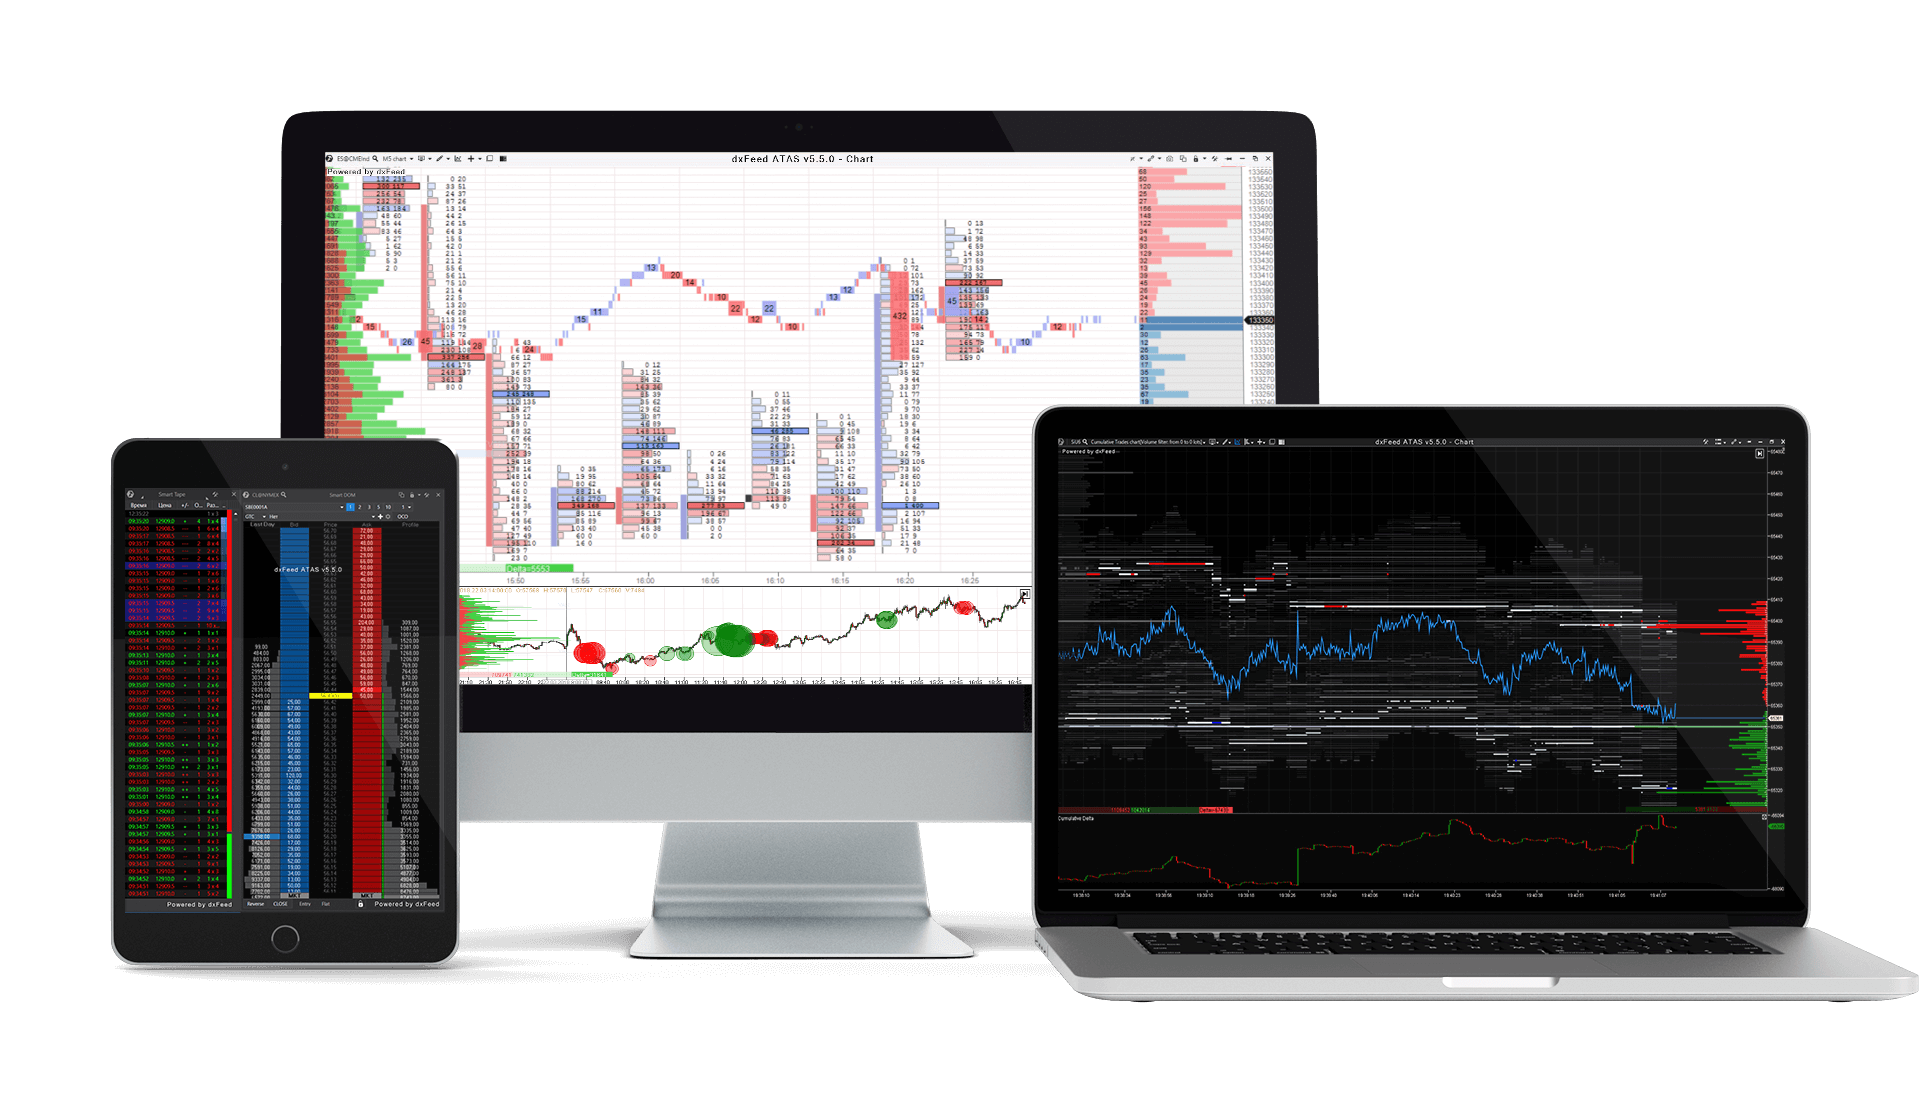 Market Data for dxFeed ATAS - Professional Analytical Platform